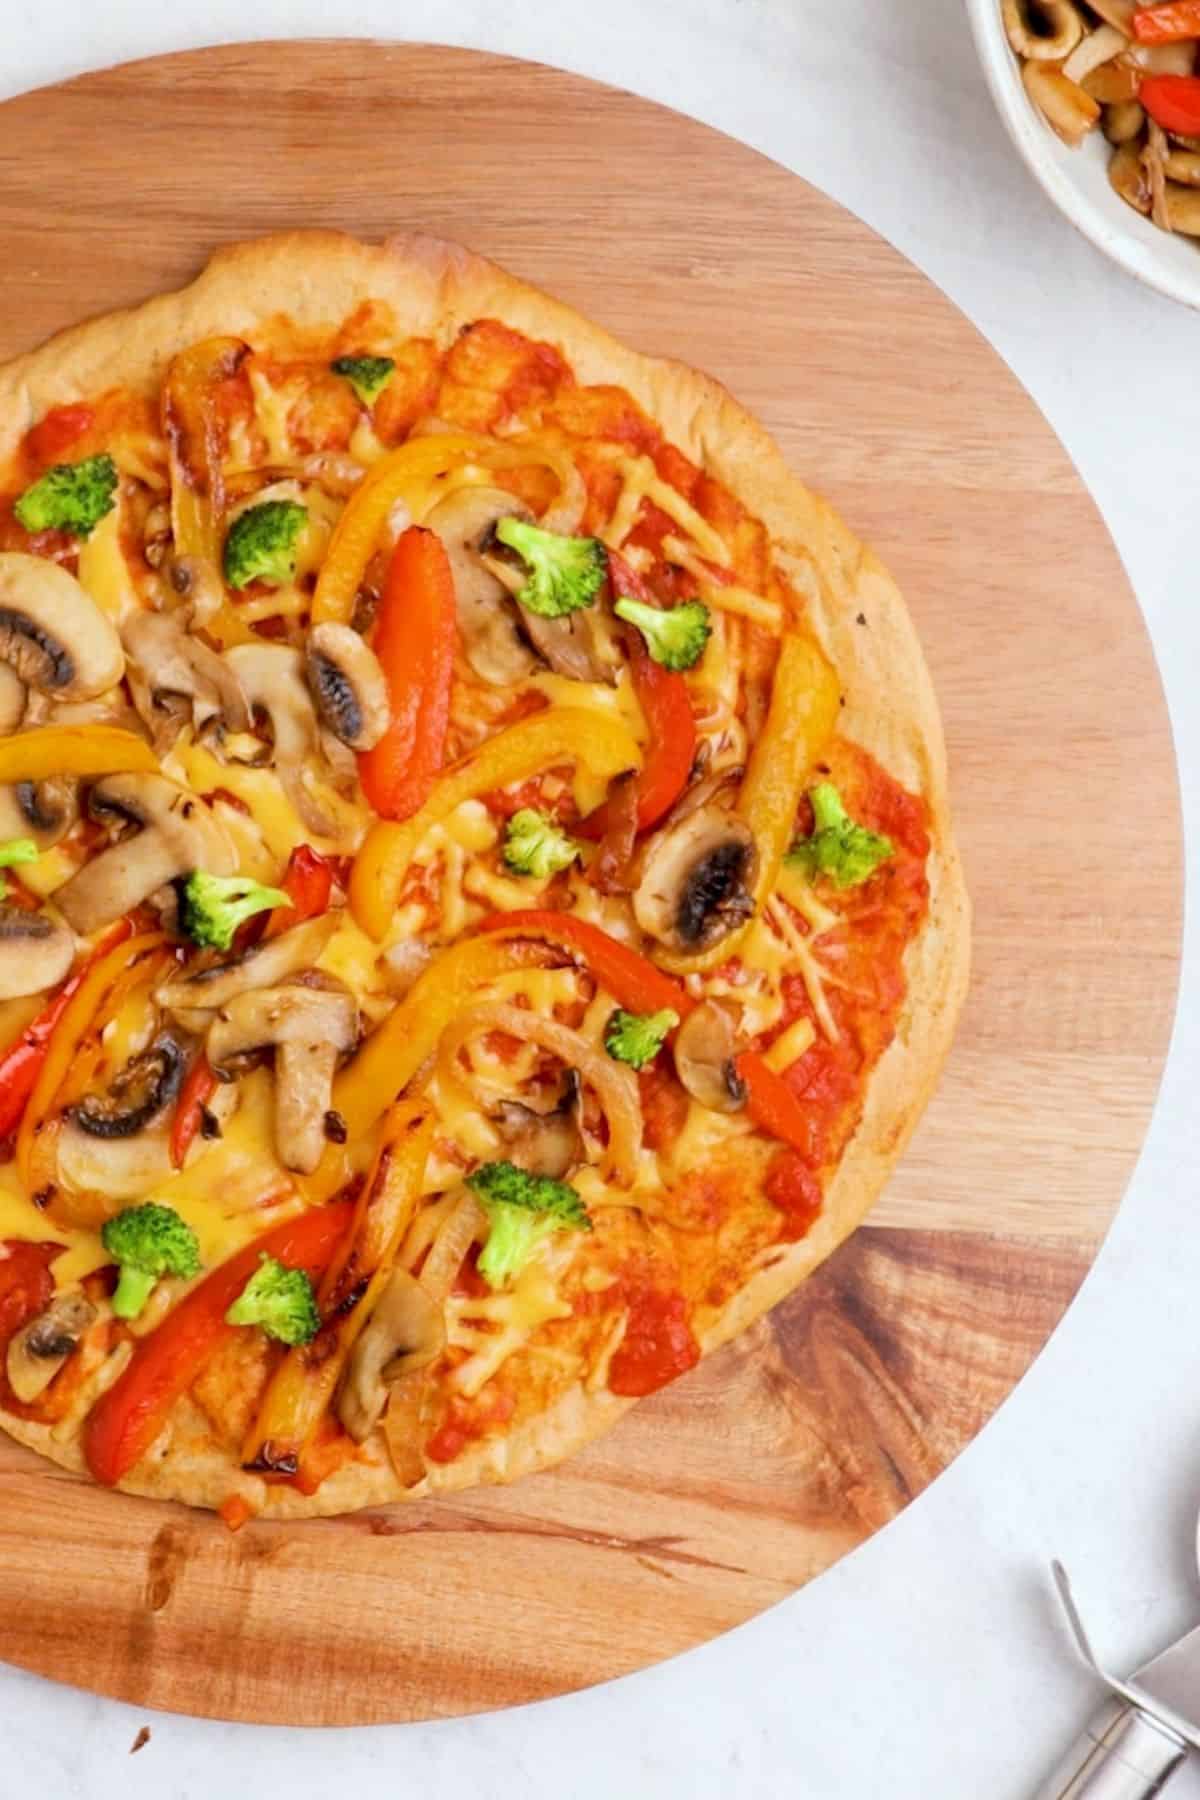 Round pizza on cutting board with sauce, cheese and grilled veggies on top.